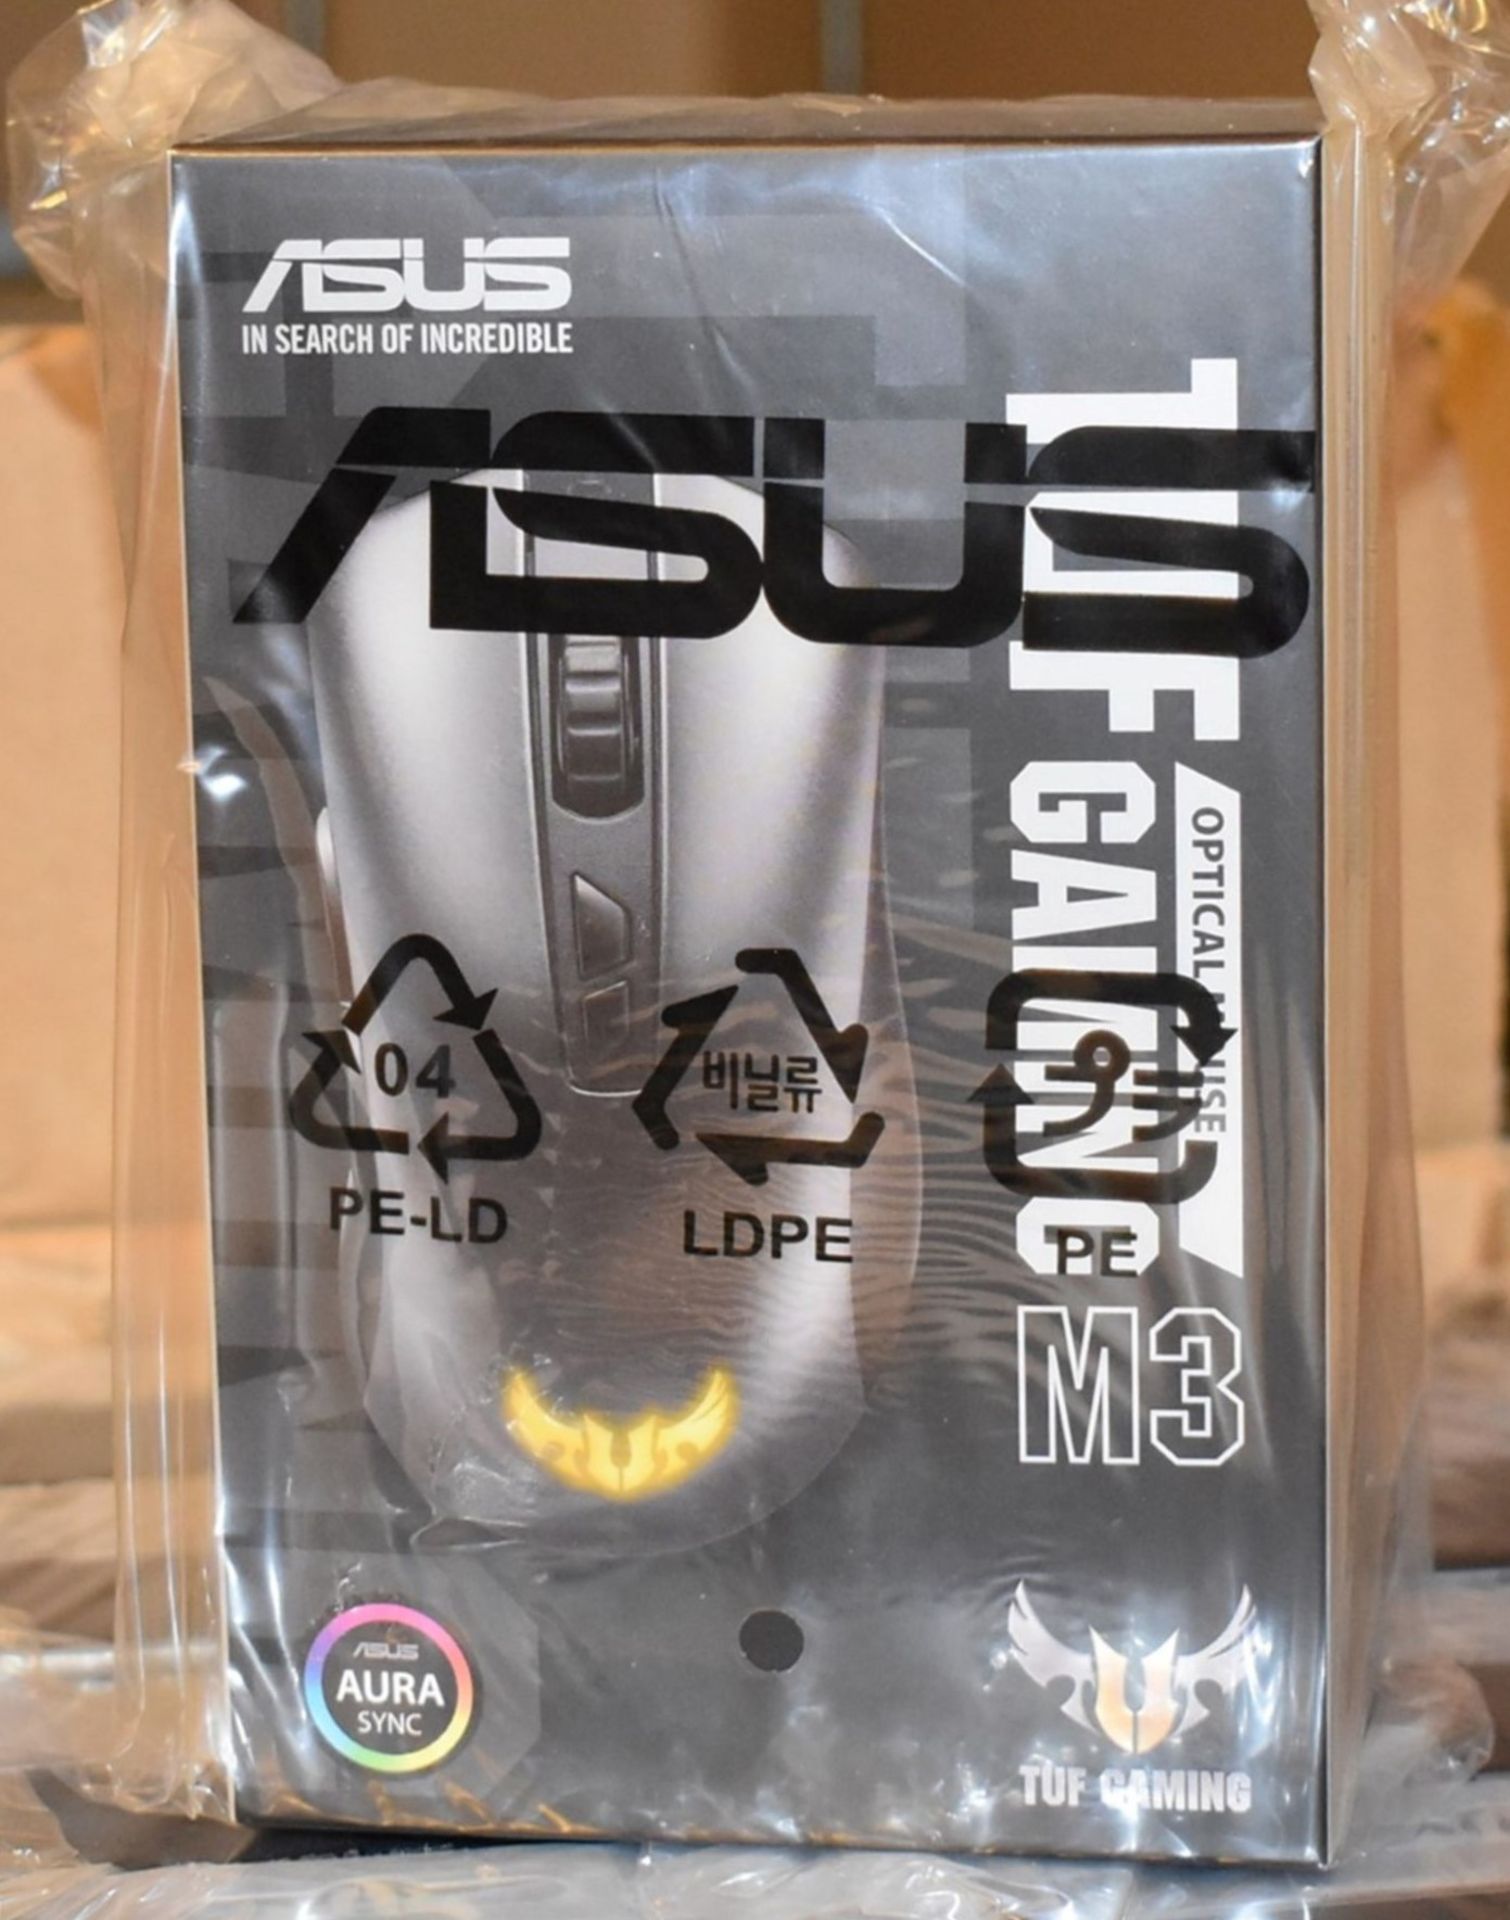 1 x Asus TUF Gaming M3 Mouse - 7000 dpi Optical Sensor - Seven Programmable Buttons With Onboard - Image 3 of 3